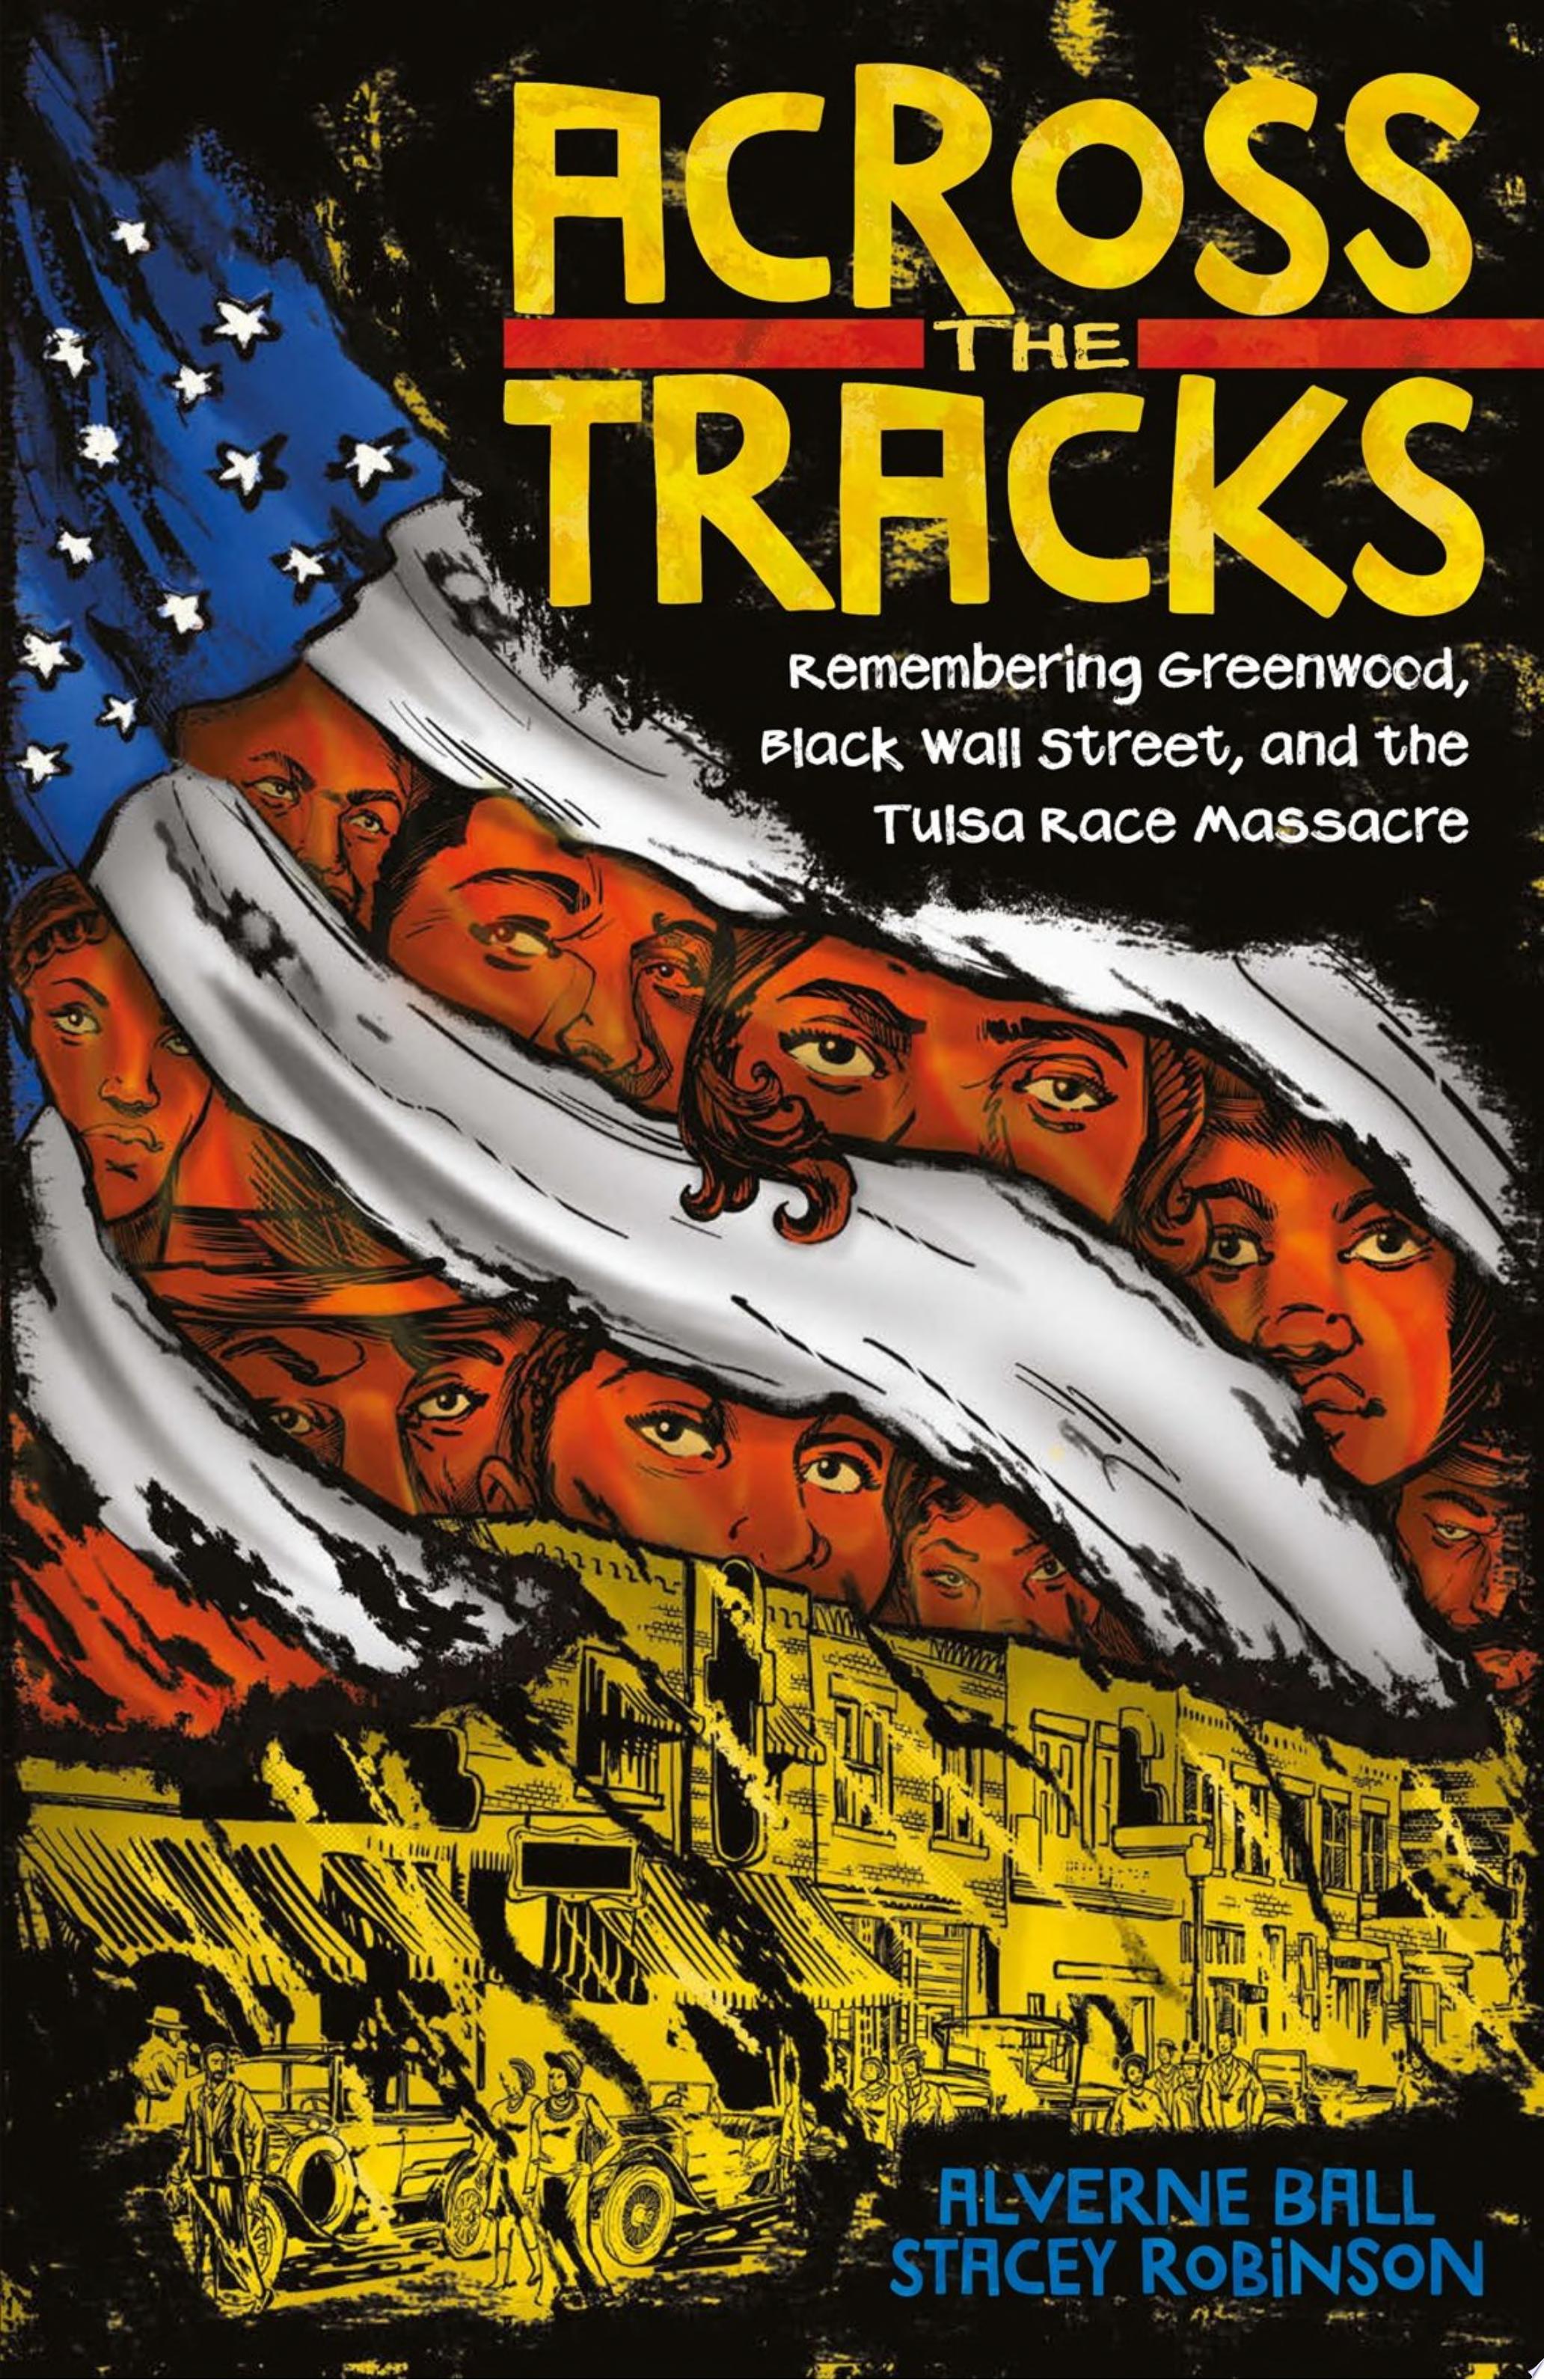 Image for "Across the Tracks"